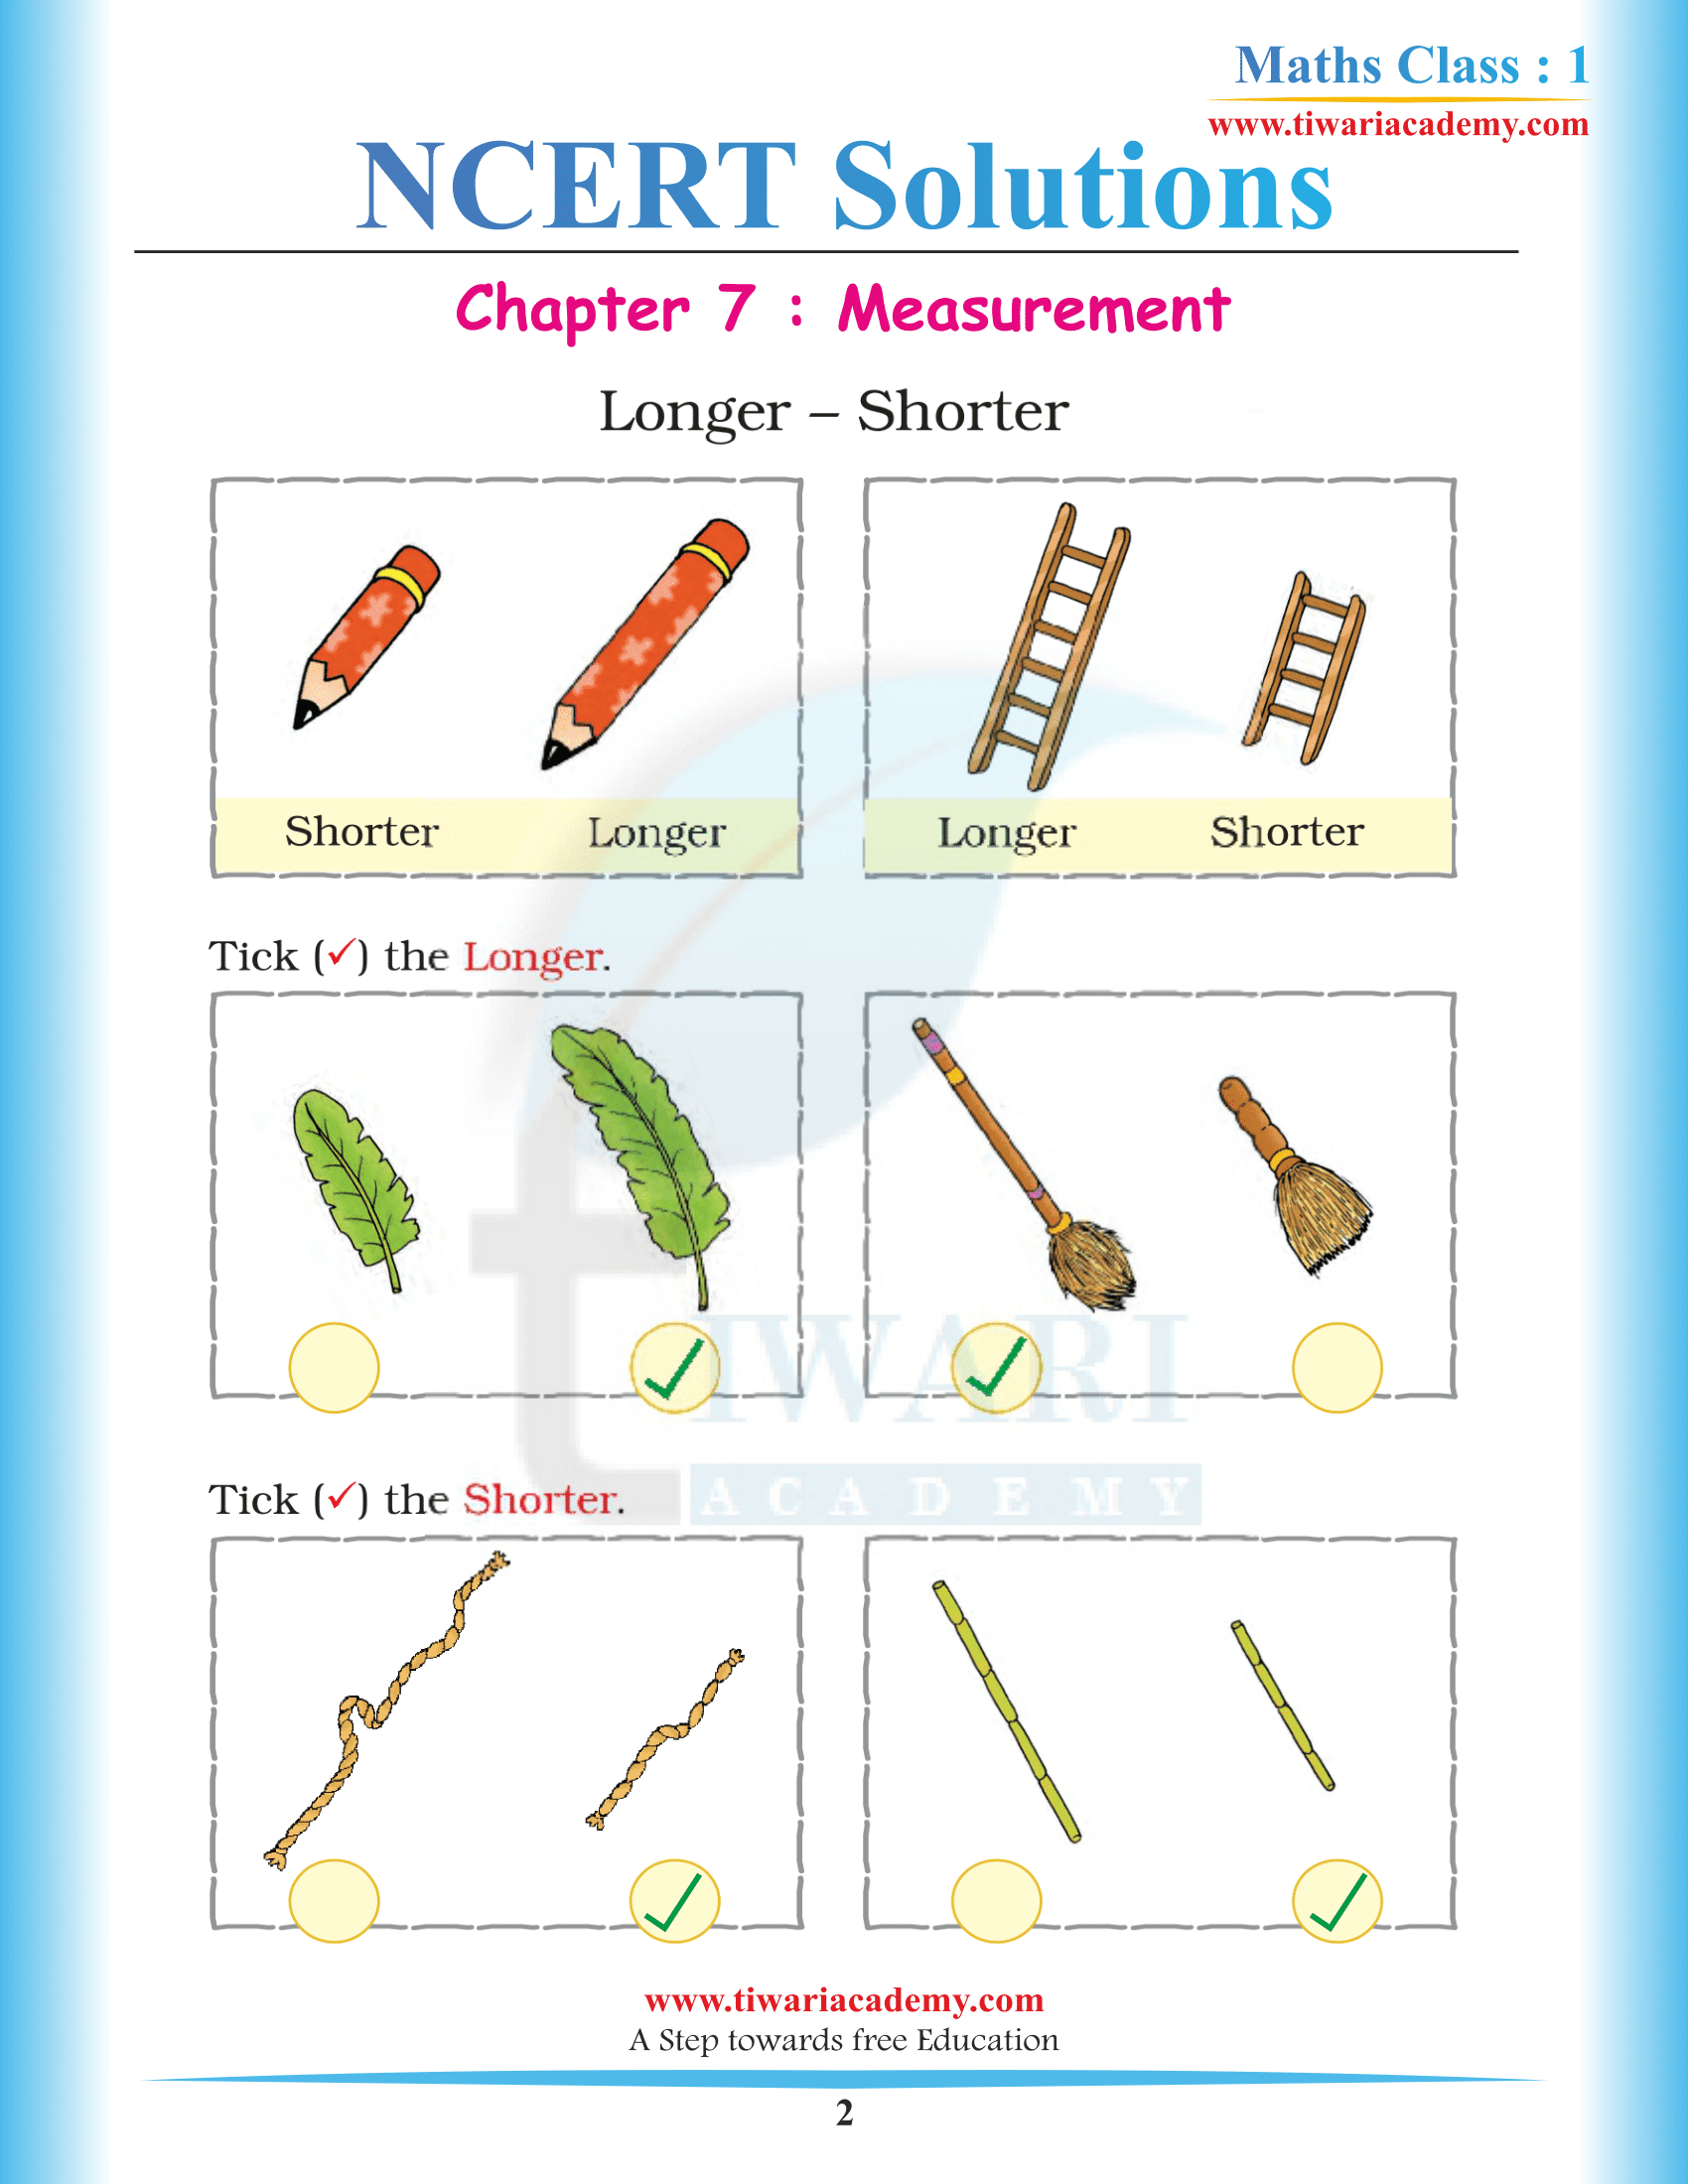 NCERT Solutions for Class 1 Maths Chapter 7 Measuremen in PDF